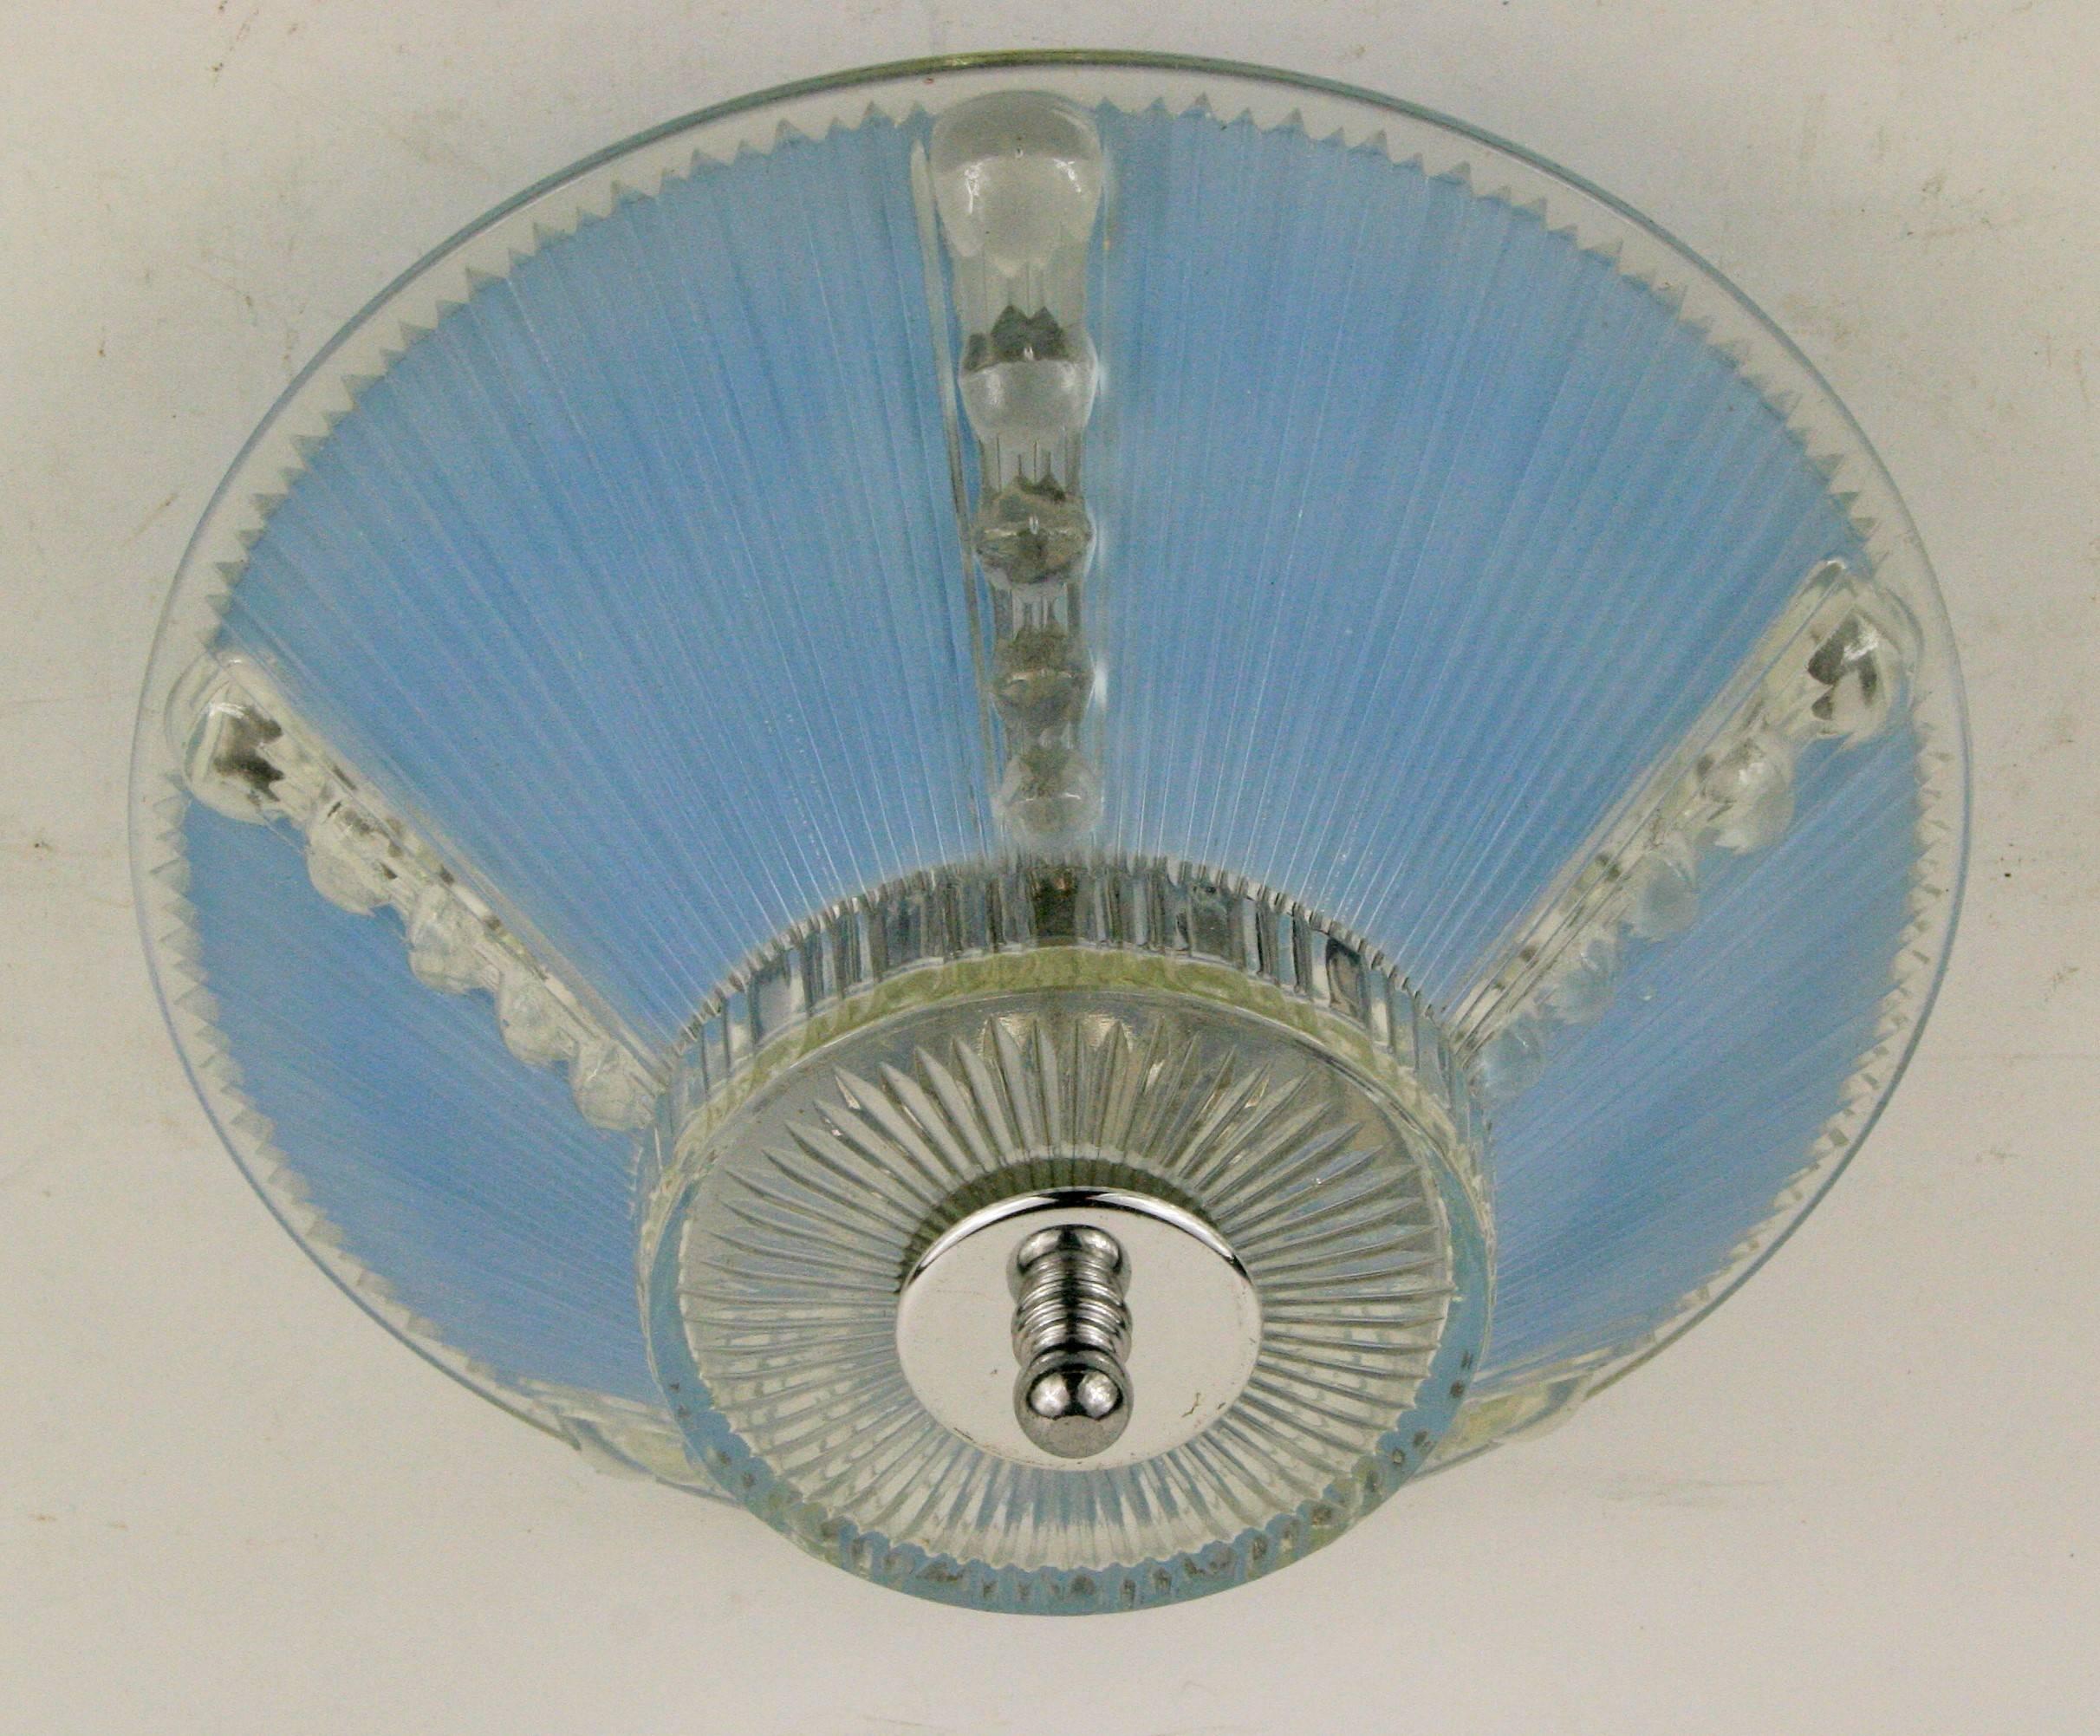 Pale blue glass flush mount.

#1-3001, a reeded pale blue whit clear bubble motif flush mount.
 Two internal 60 watt max candelabra based bulbs.
 Newly rewired.